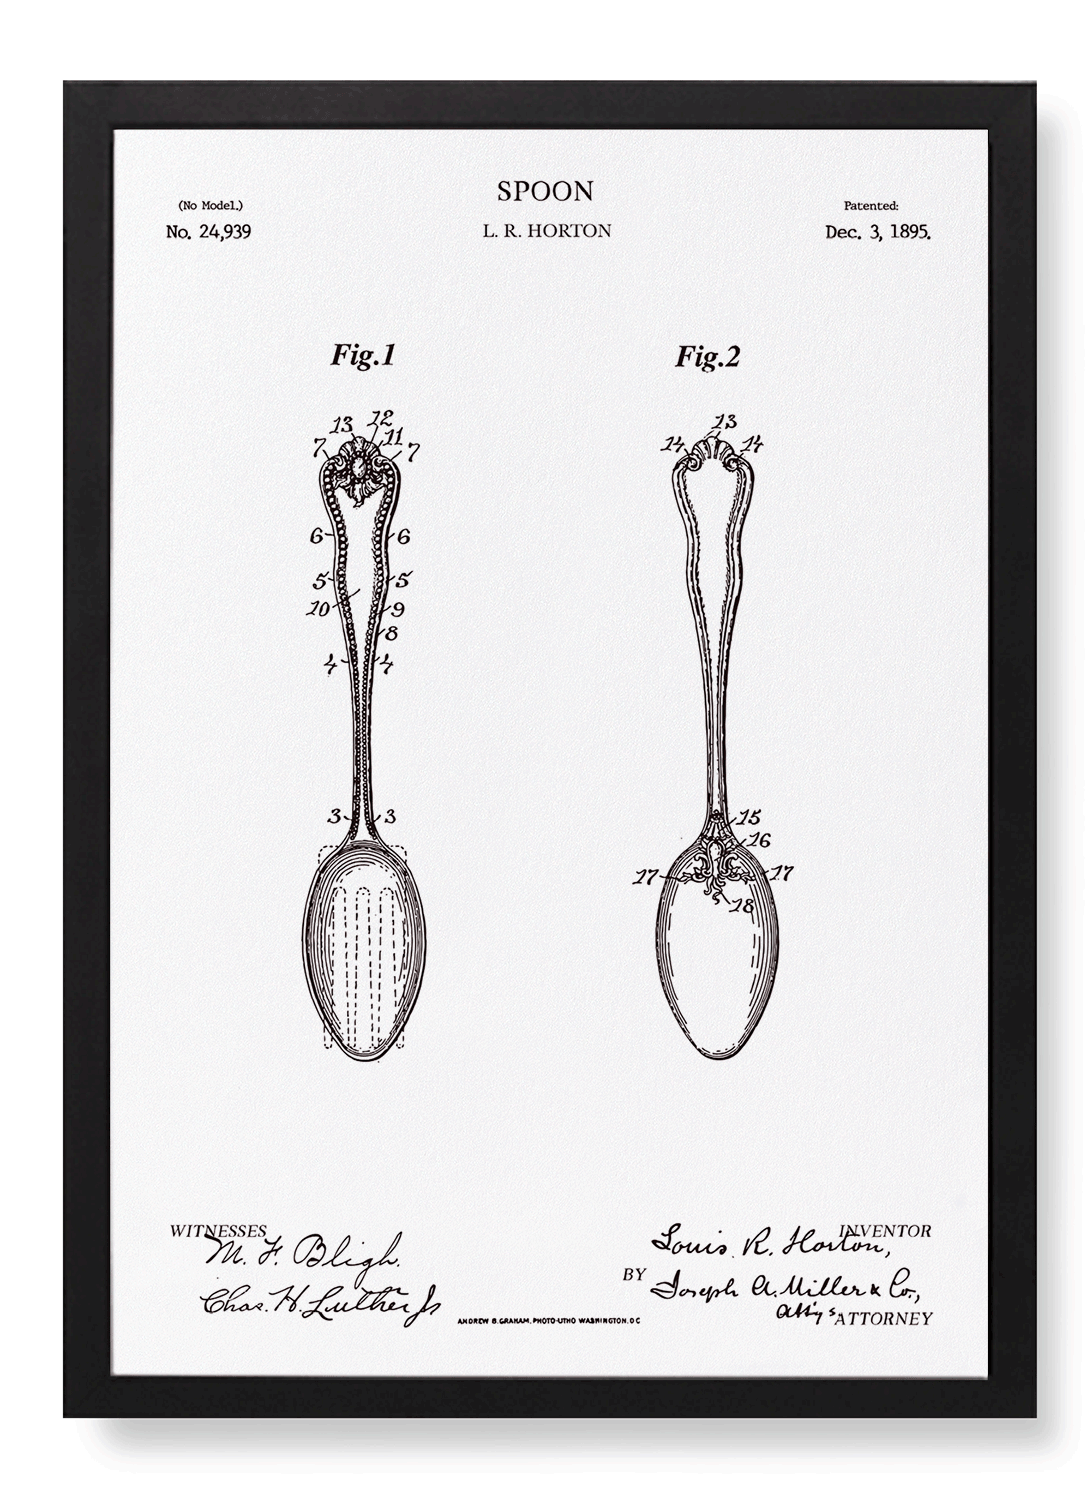 PATENT OF SPOON (1895)